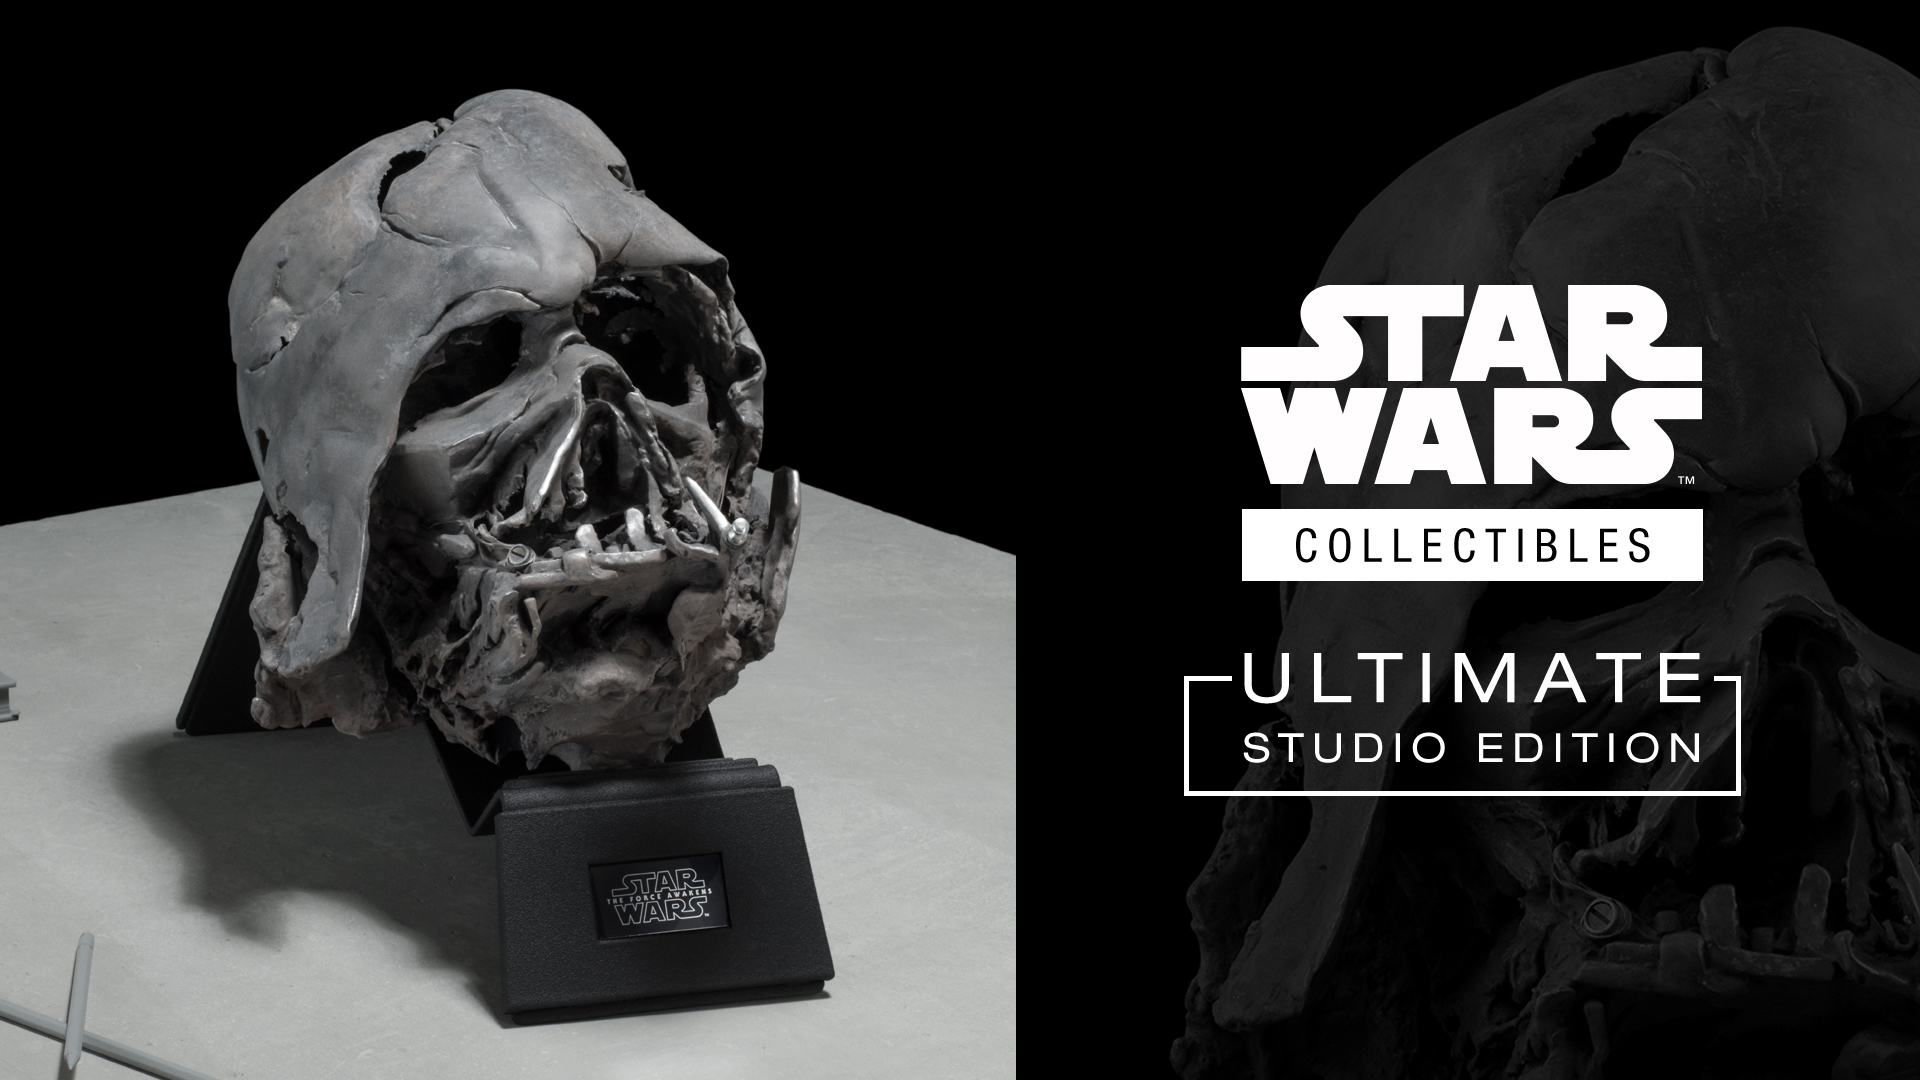 Star Wars Launches Most Authentic Line of Prop Replicas Ever Created